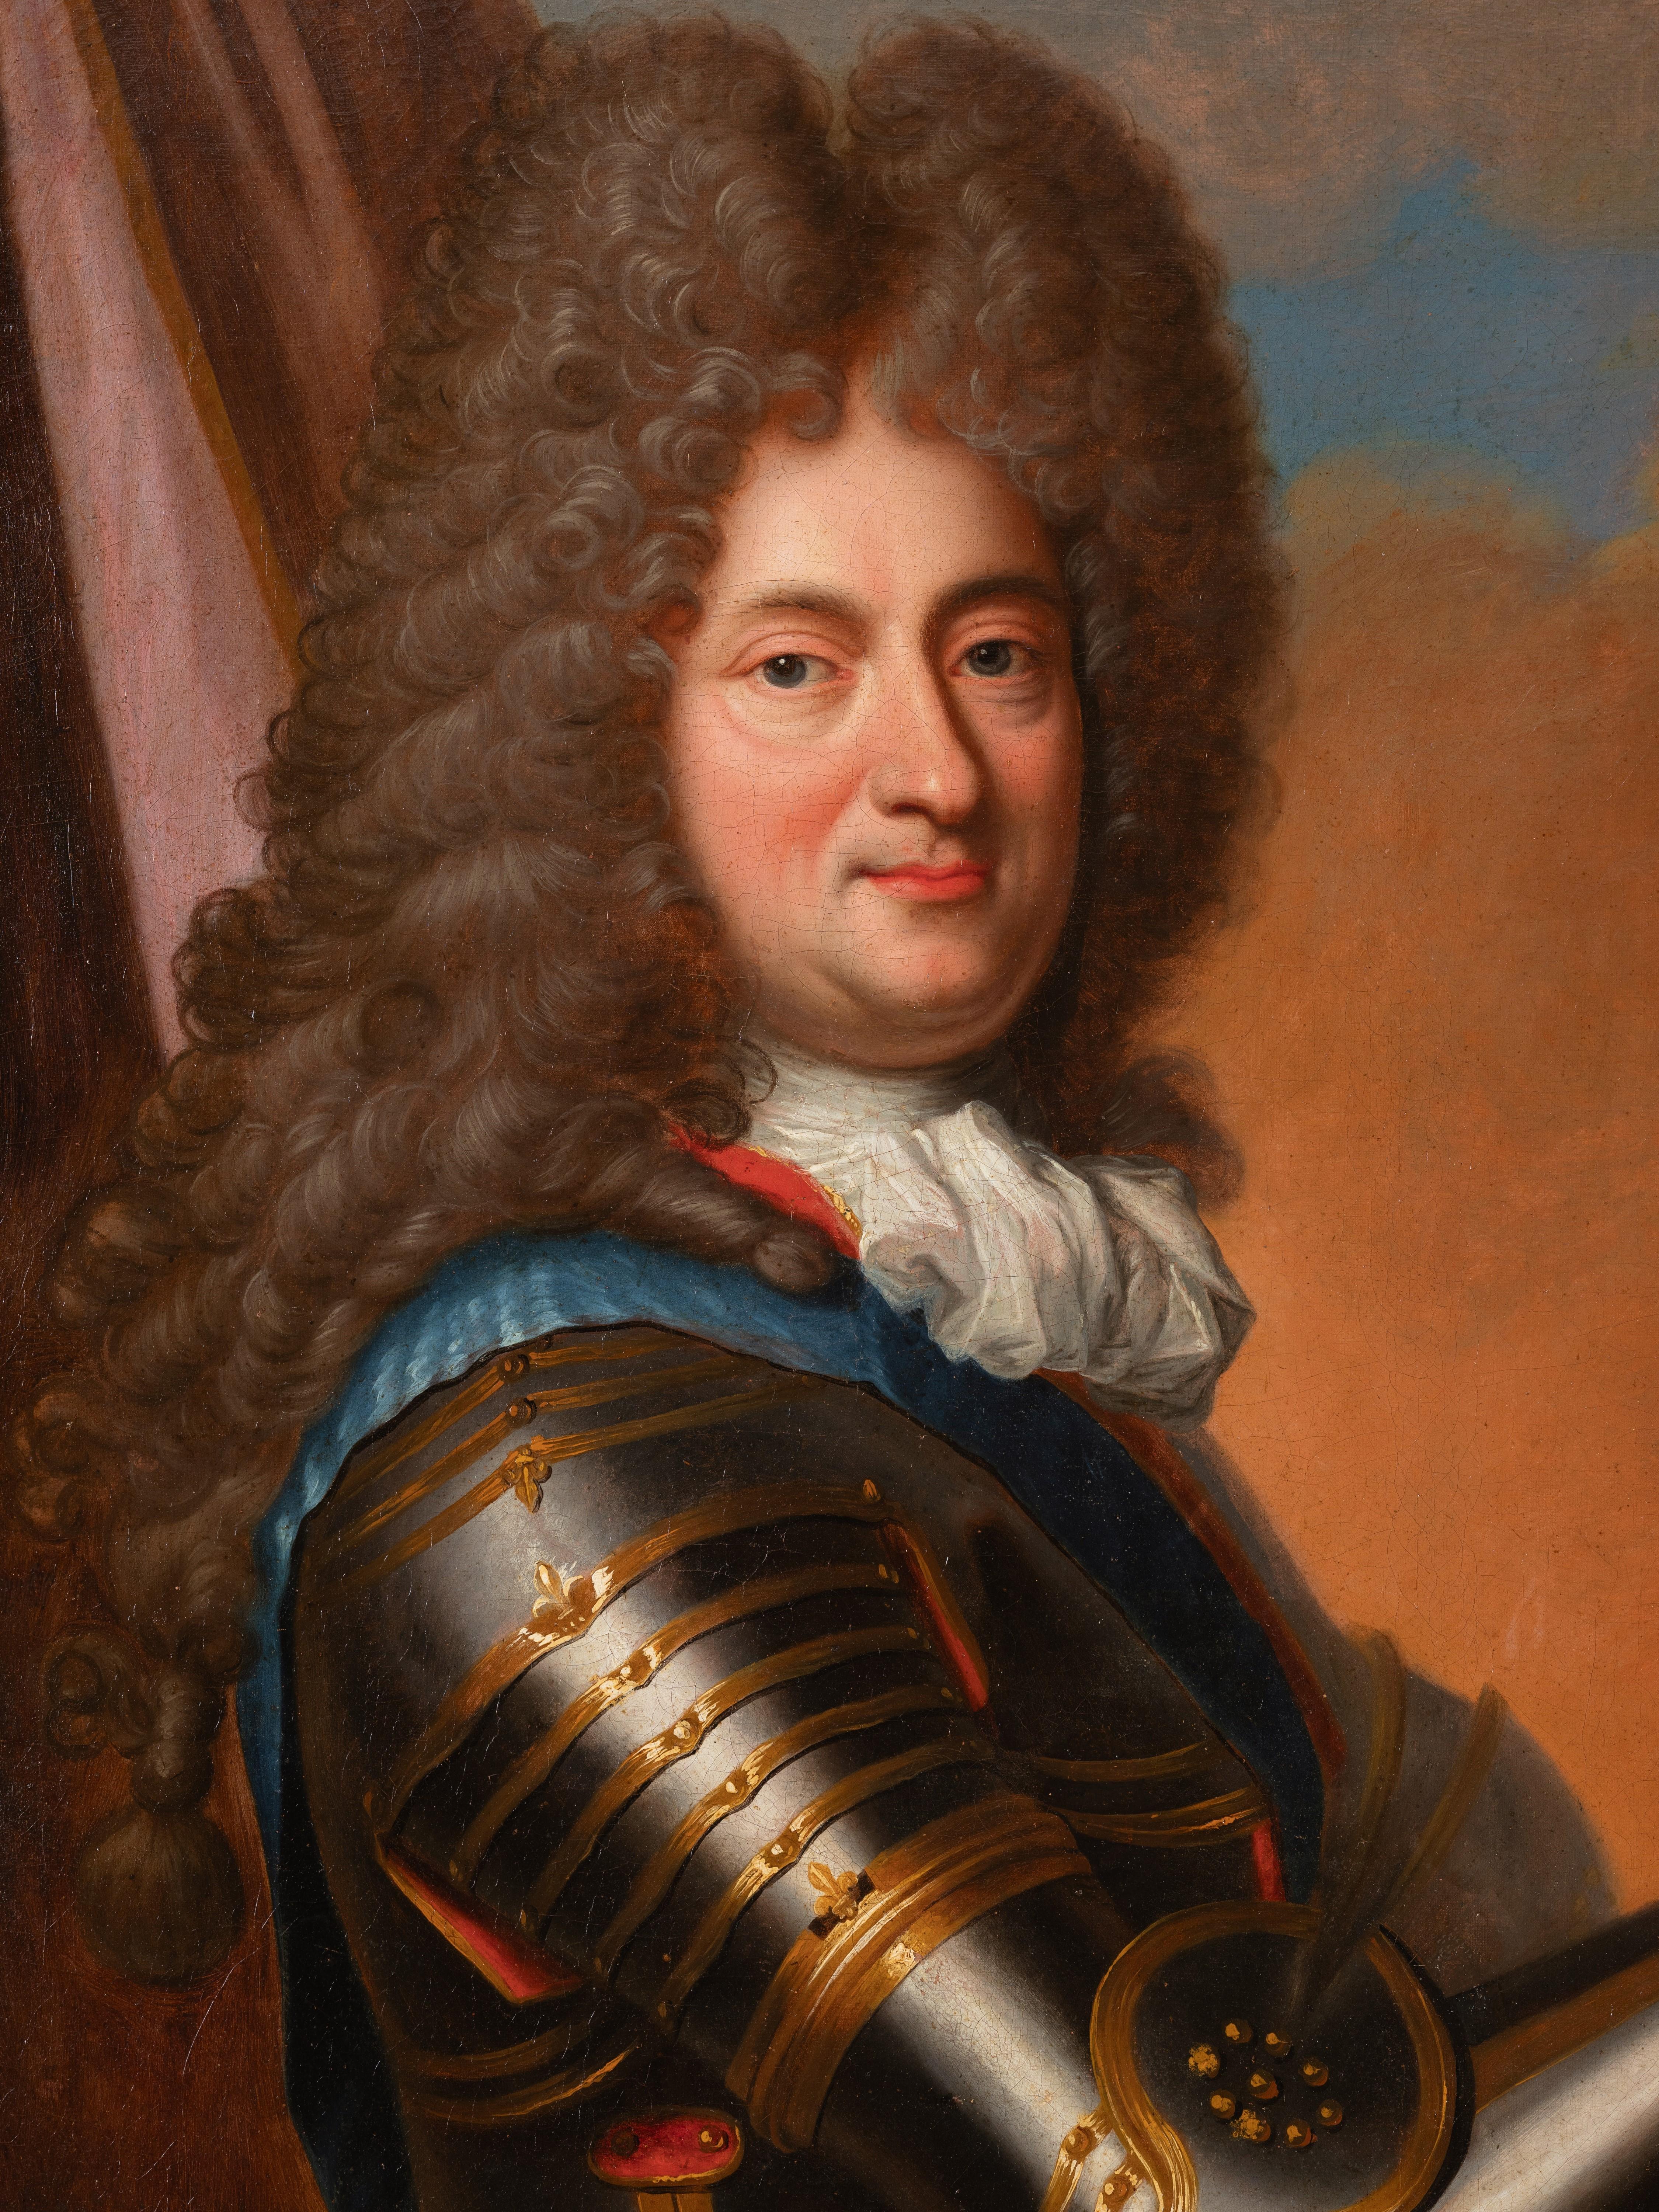 Philippe II, Duke of Orleans, French prince, 18th c. French school - Brown Portrait Painting by Jean Baptiste Santerre